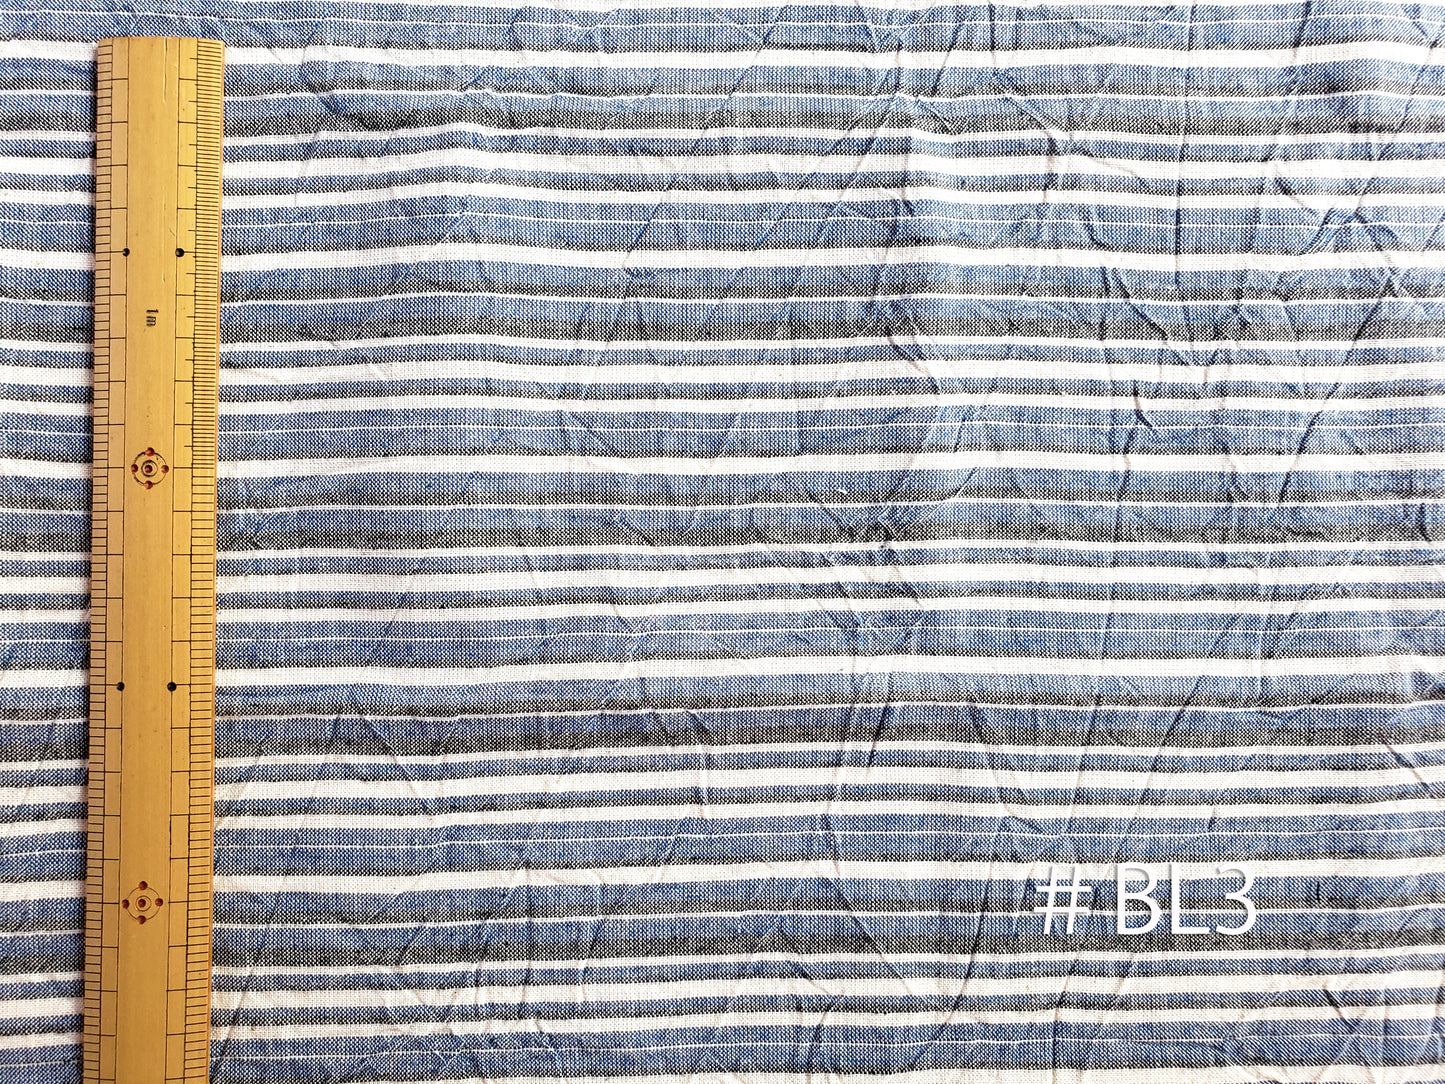 Kameda striped cotton fabric BL3 wrinkled thick fabric that goes well with jeans